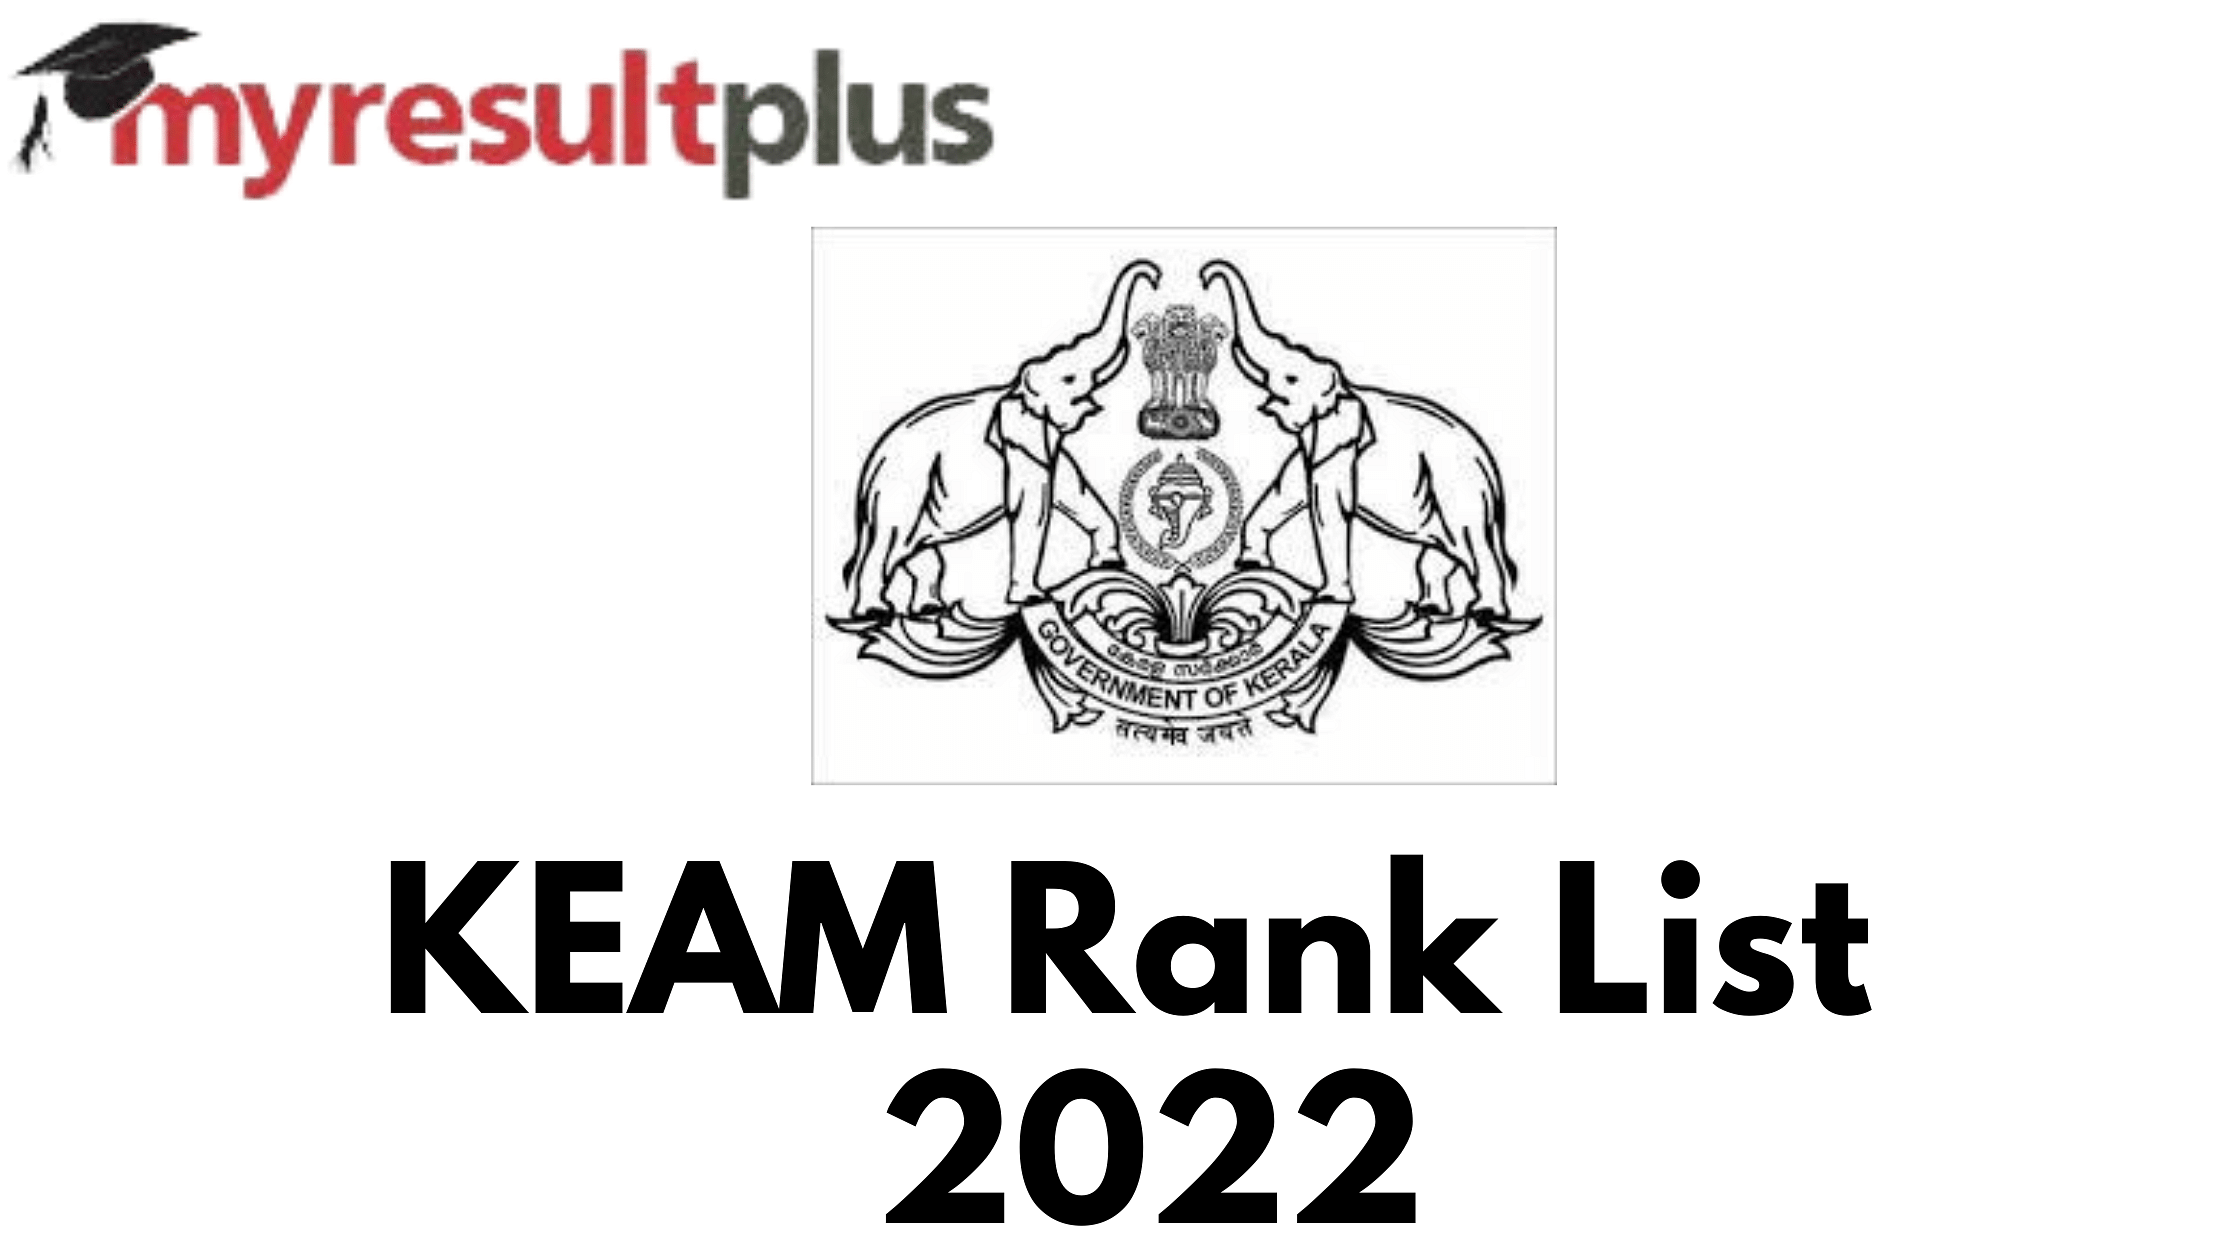 KEAM Rank List 2022 Out, Know How to Check Here